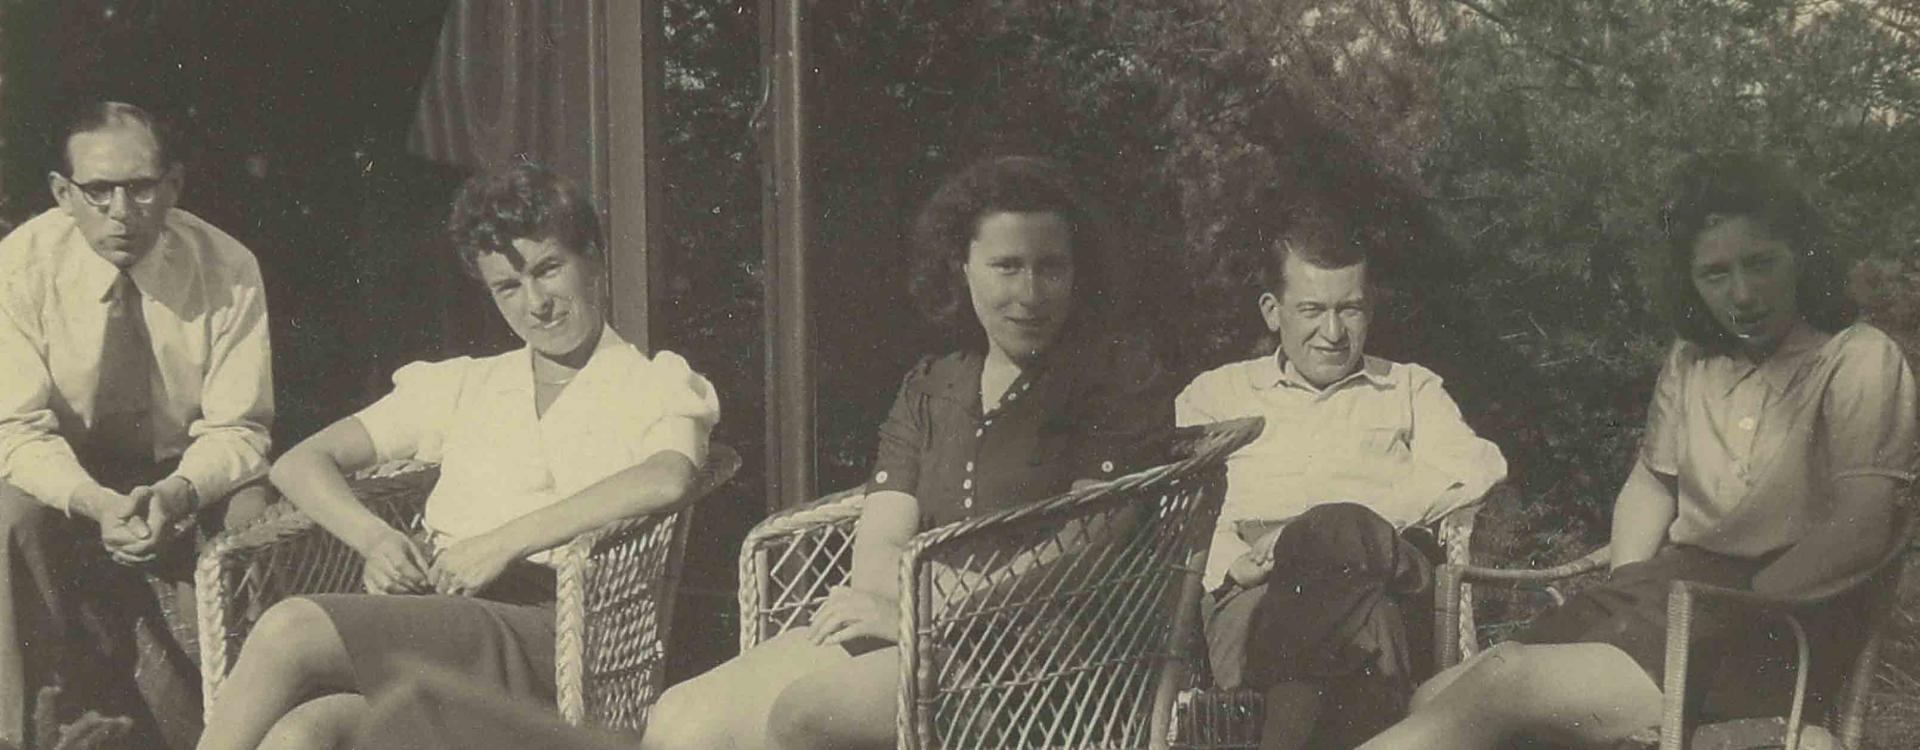 Black and white photograph of two men and three women sitting on chairs in a garden.